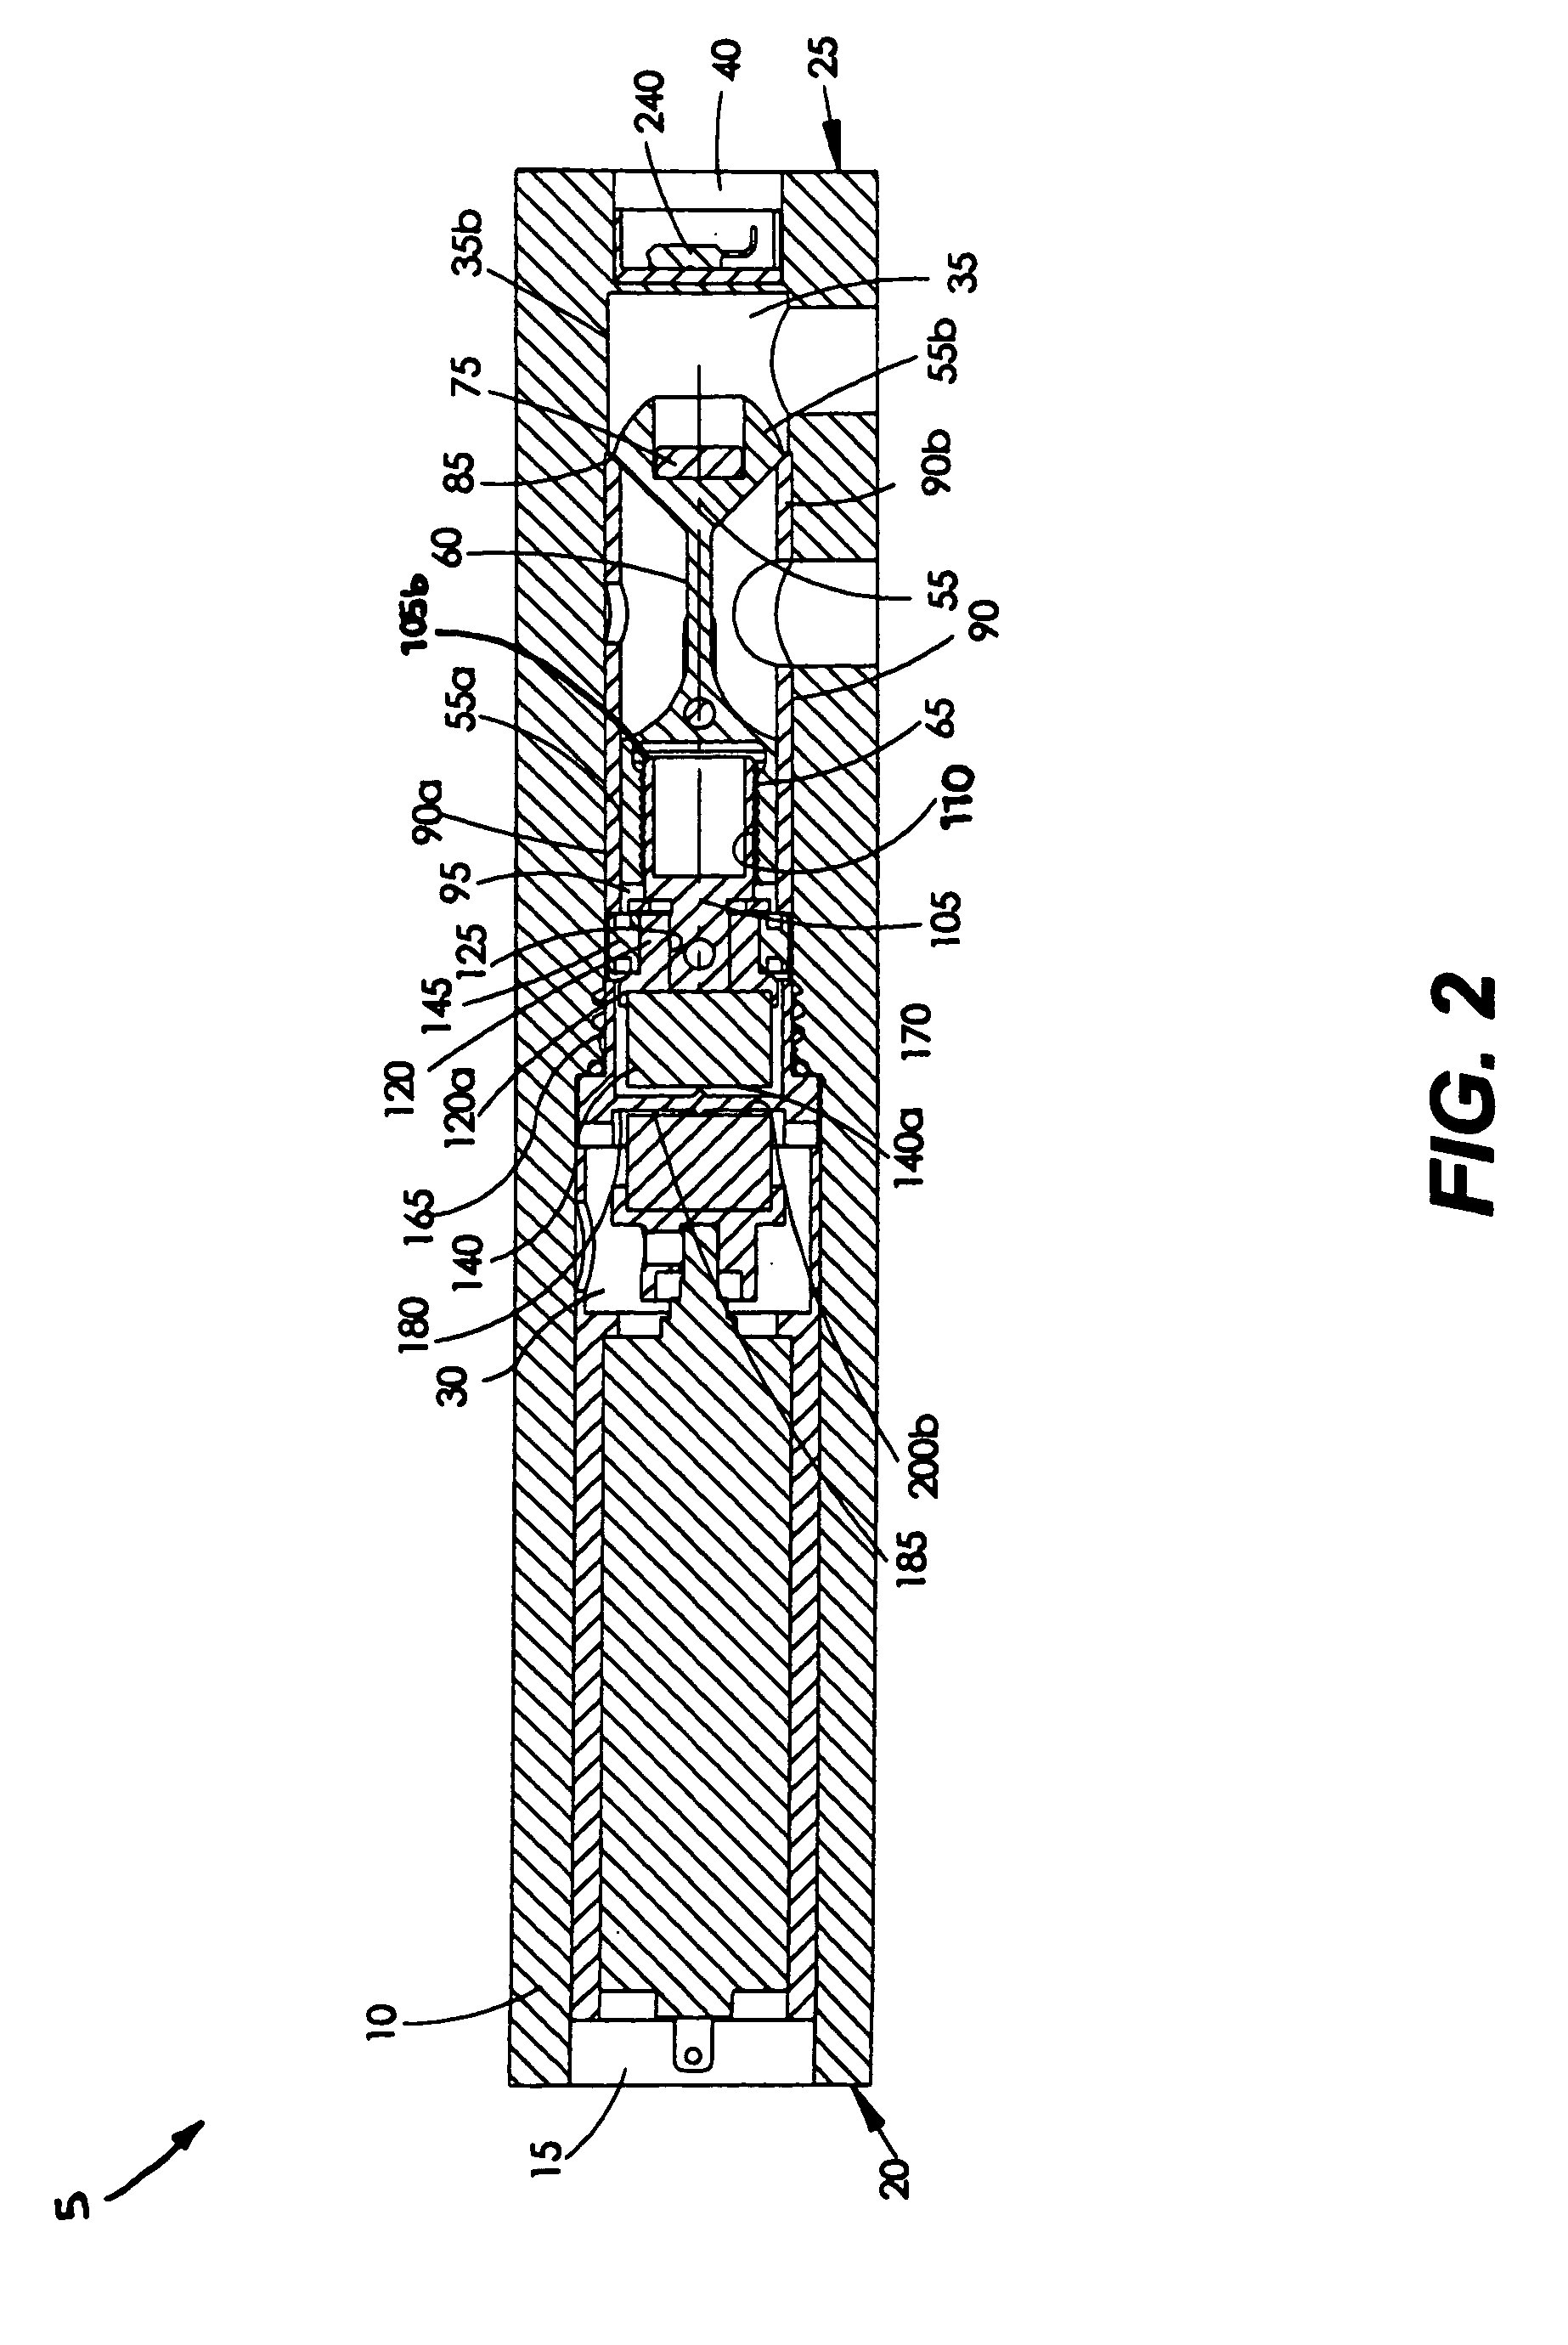 Magnetically-coupled actuating valve assembly